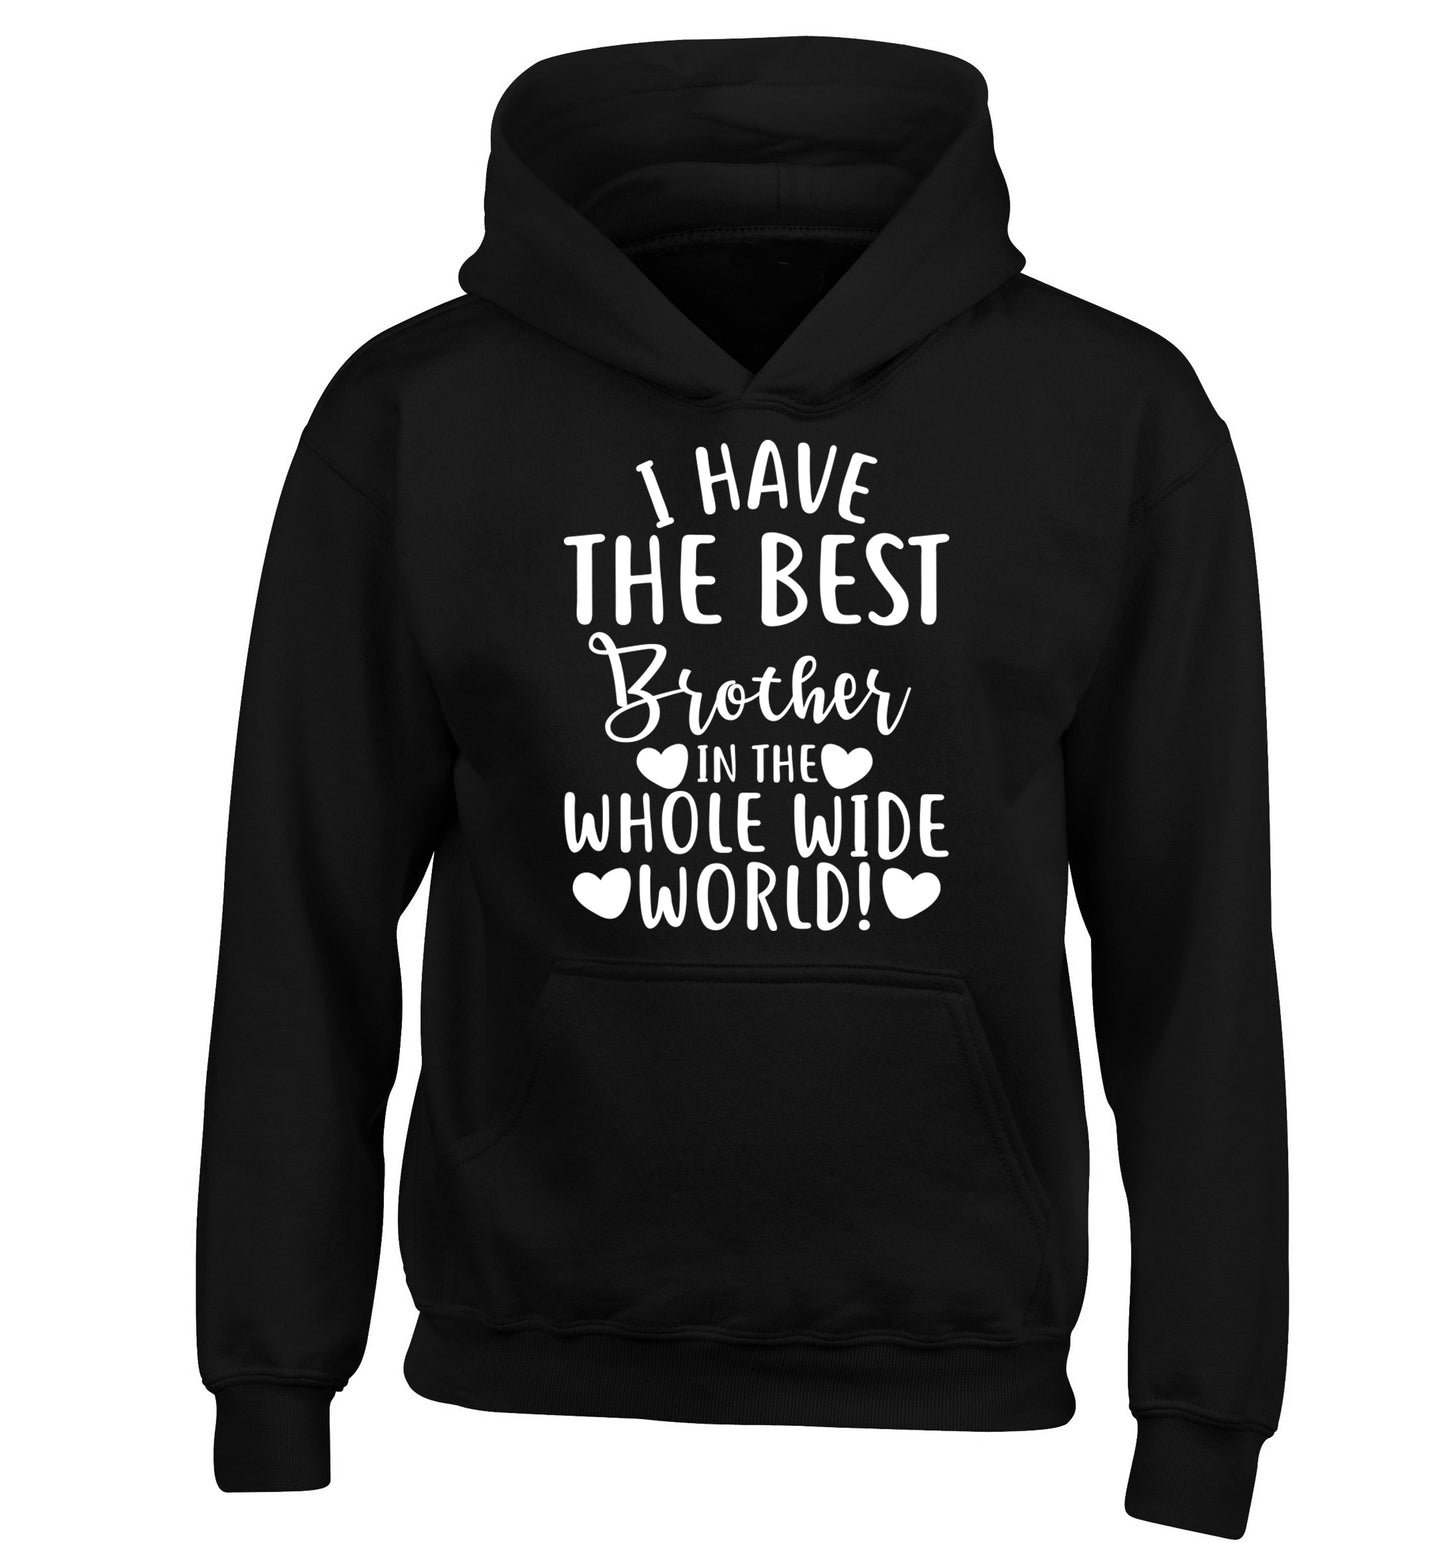 I have the best brother in the whole wide world! children's black hoodie 12-13 Years